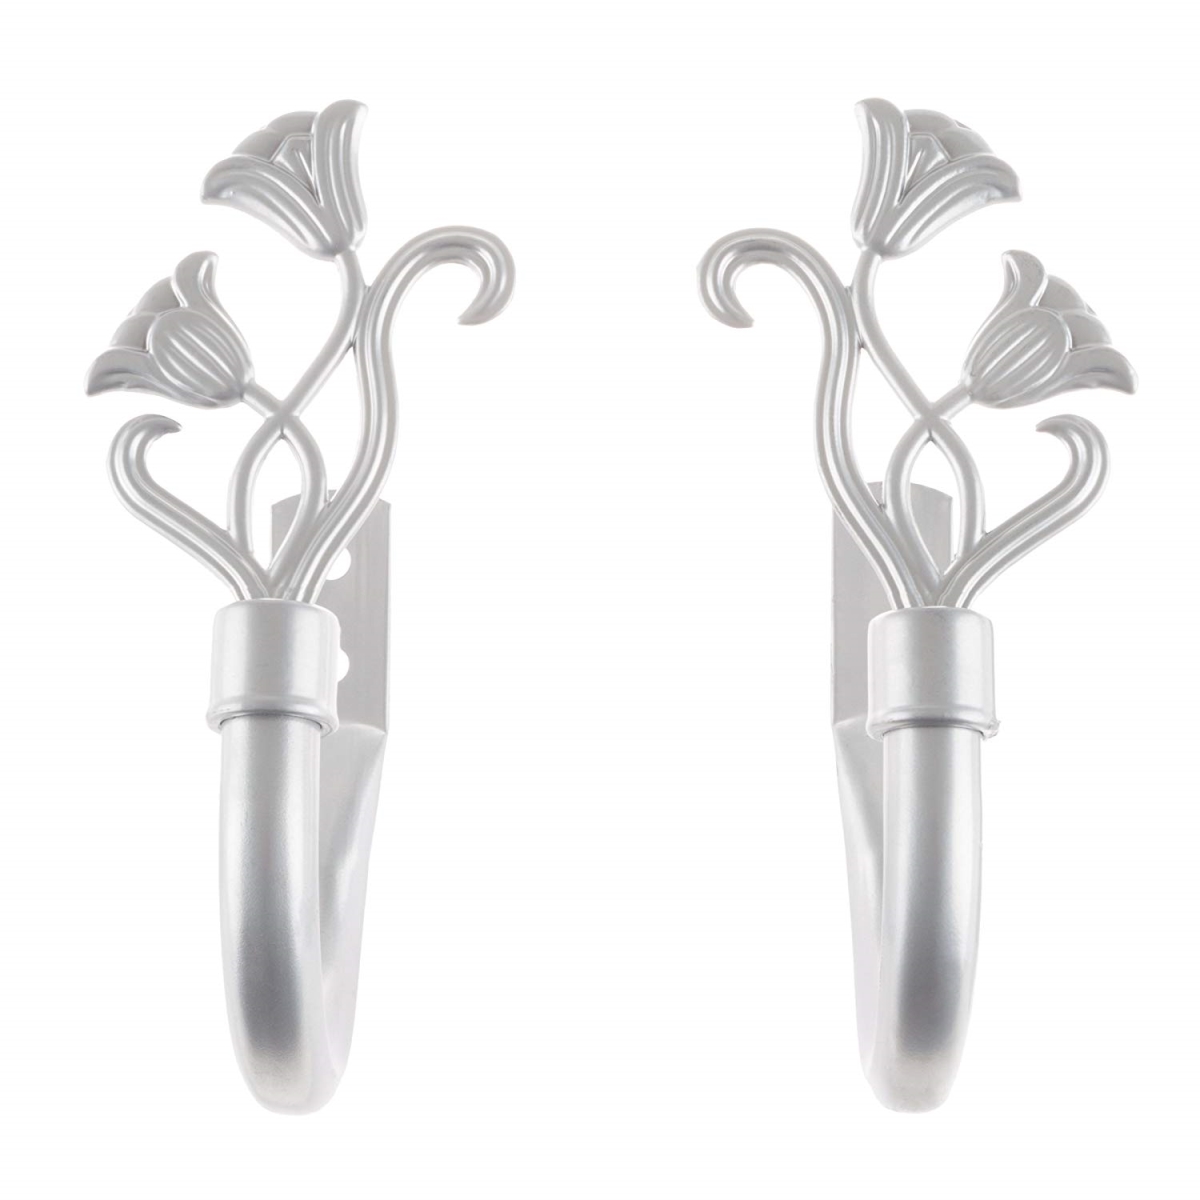 63a-46993 Curtain Holdbacks With Mounting Hardware Drape Tieback Hooks With Floral Finials, Silver - Set Of 2